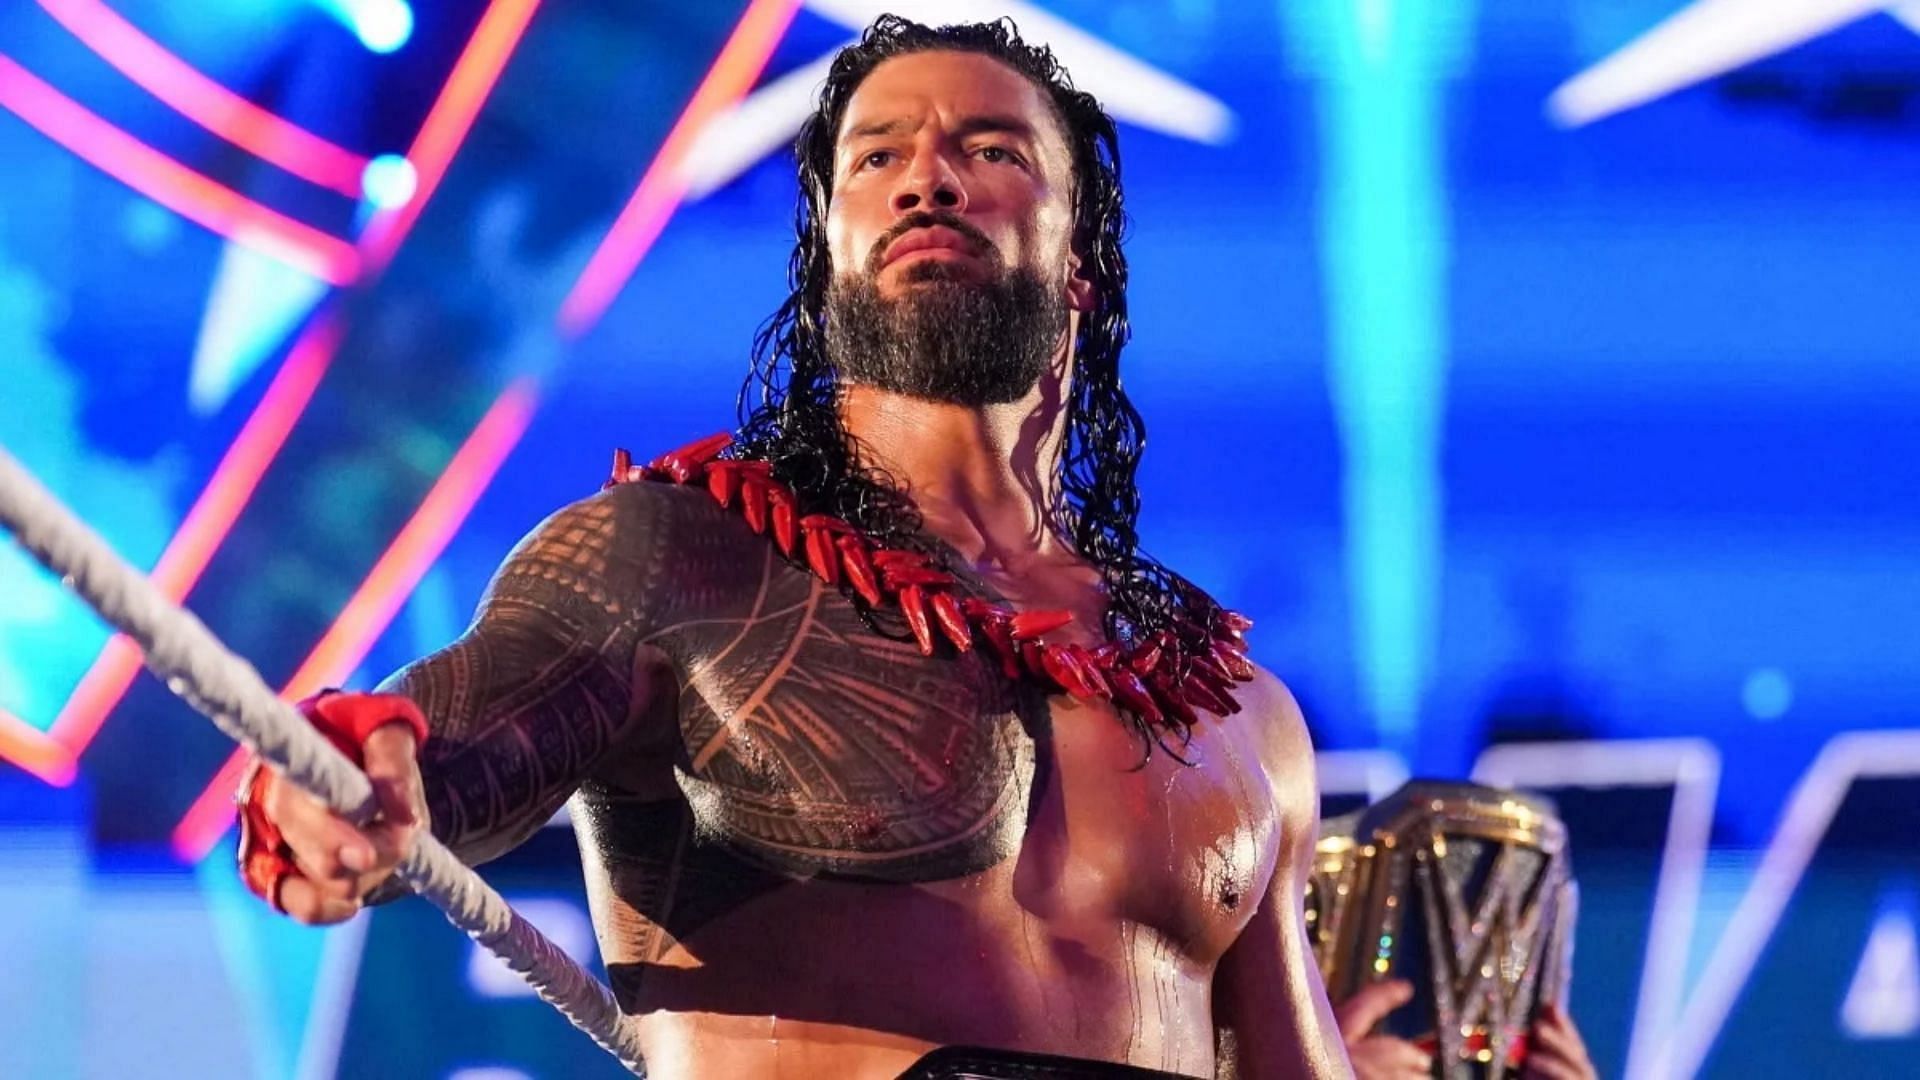 Roman Reigns is still at the top in WWE